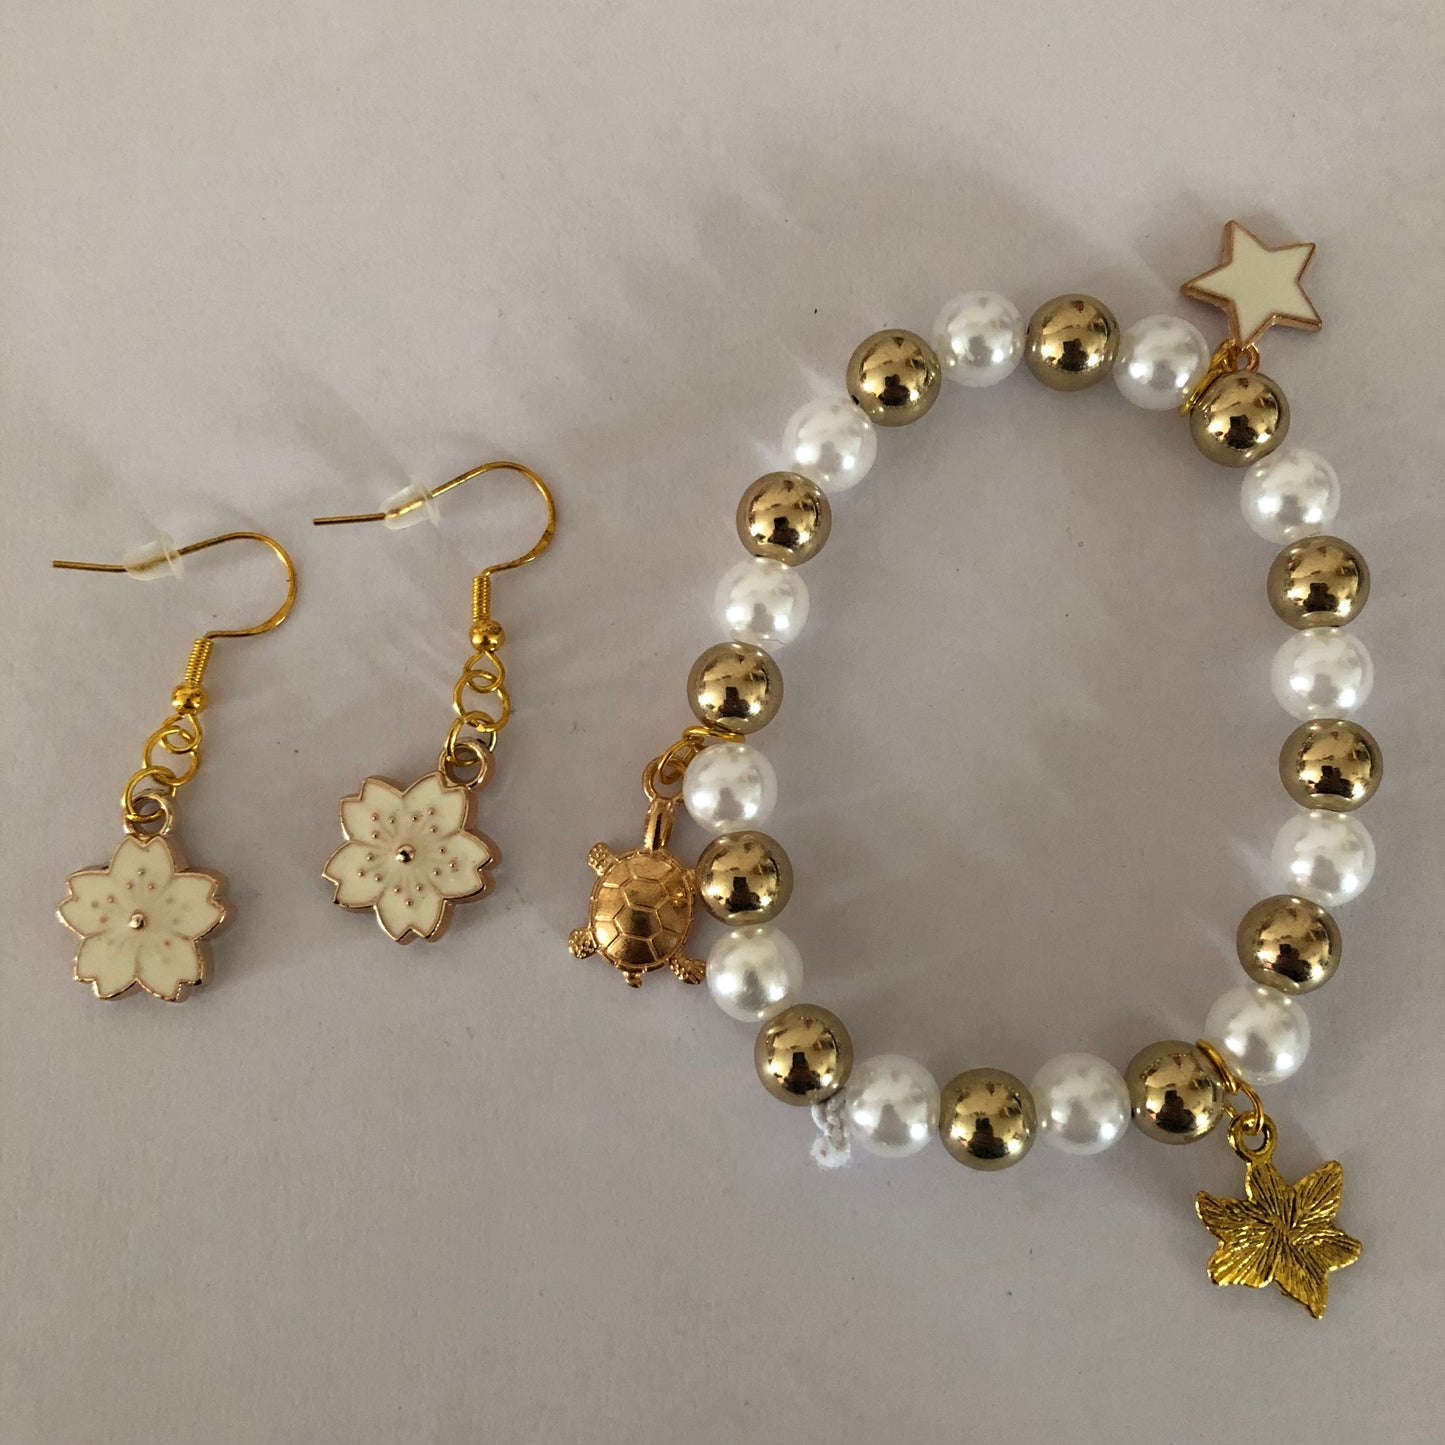 Jewelry set | Beaded bracelet with charms and a pair of flower earrings